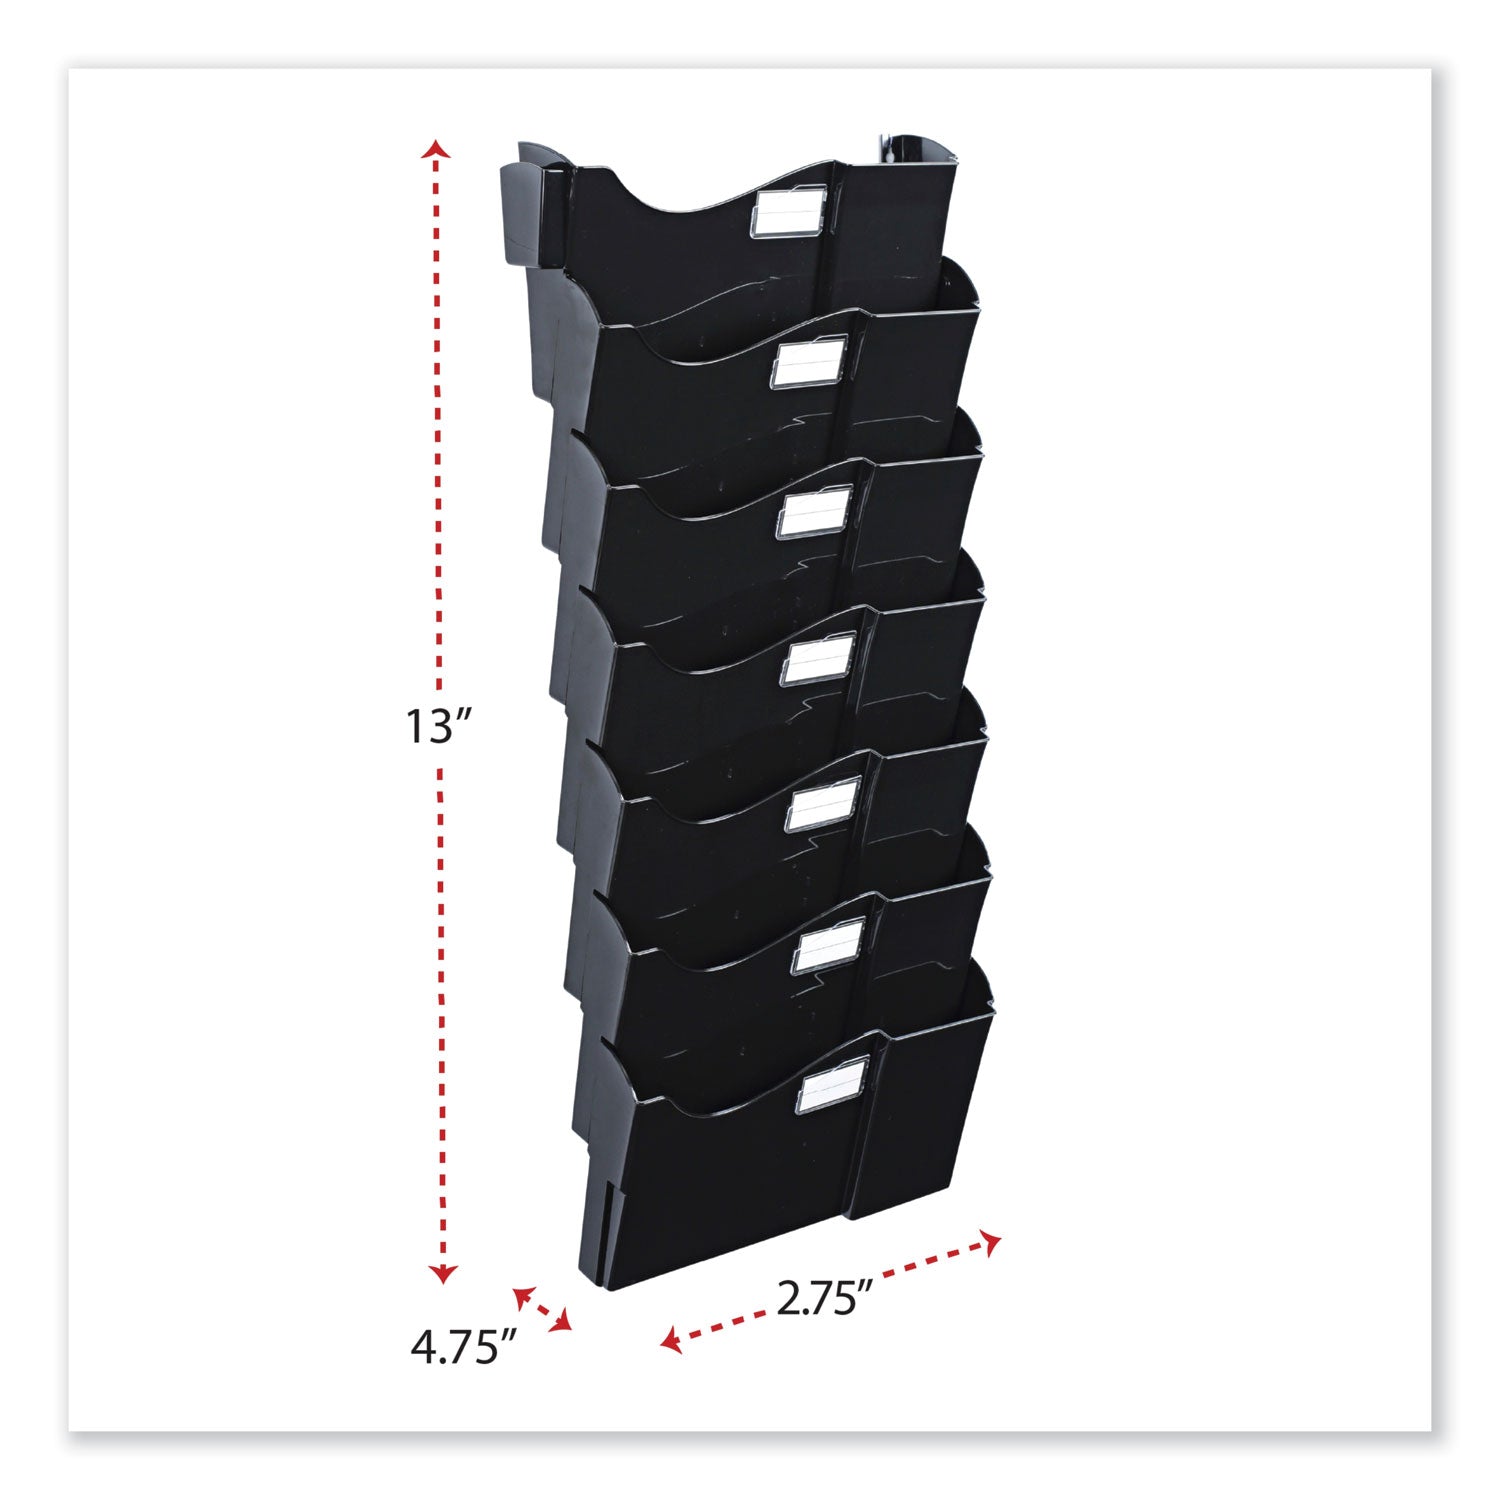 Grande Central Filing System, 7 Sections, Legal/Letter Size, Wall Mount, 16" x 4.75" x 38.25", Black, 7/Pack - 